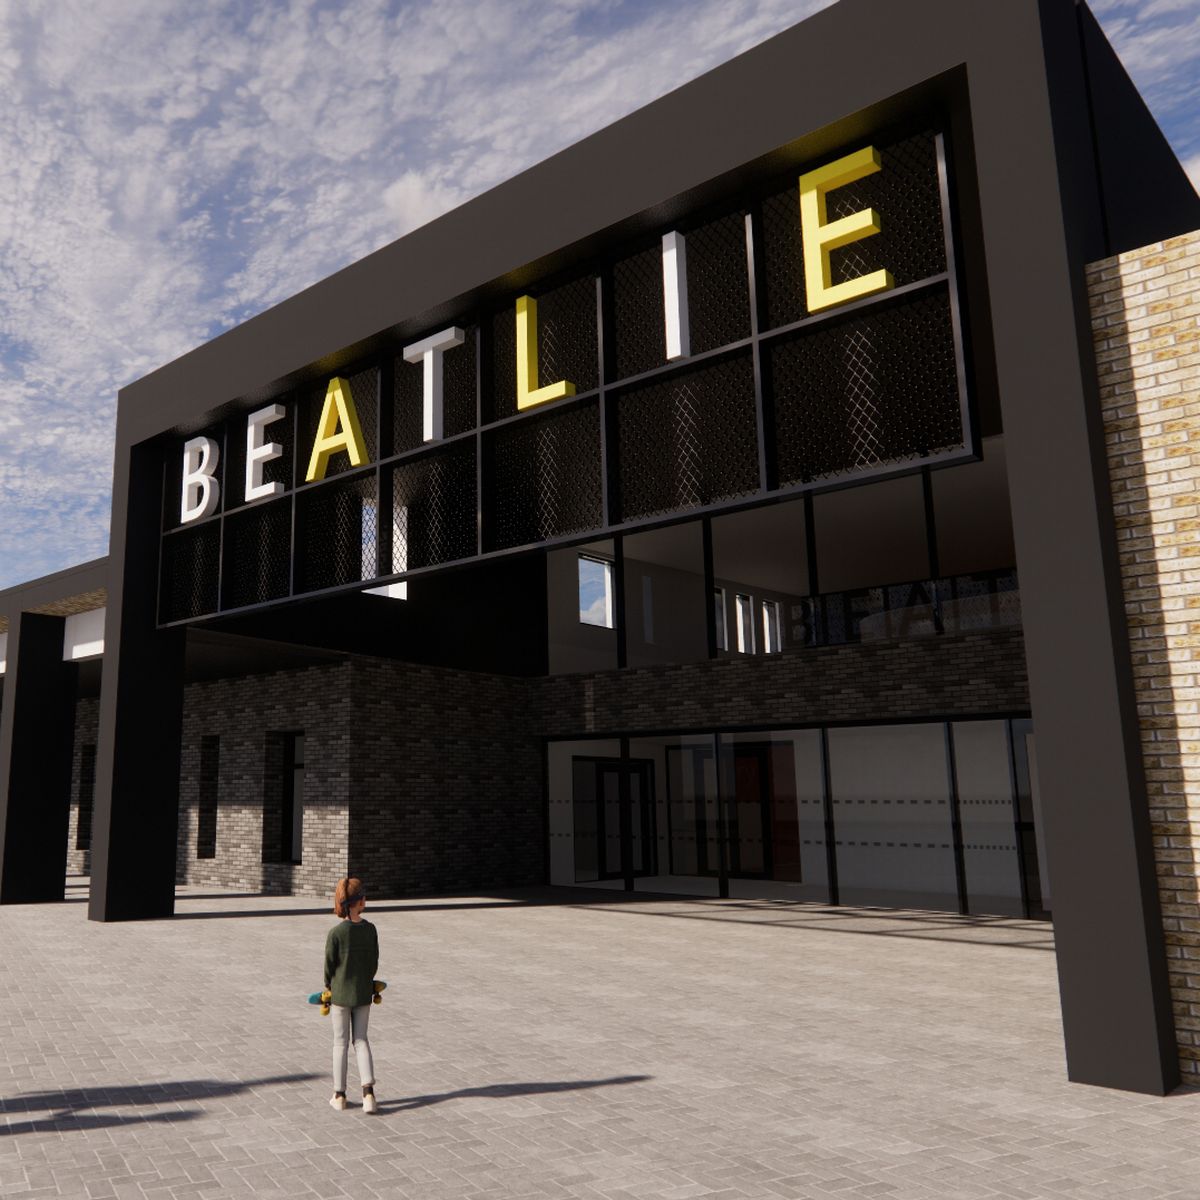 Financial close reached on Beatlie School